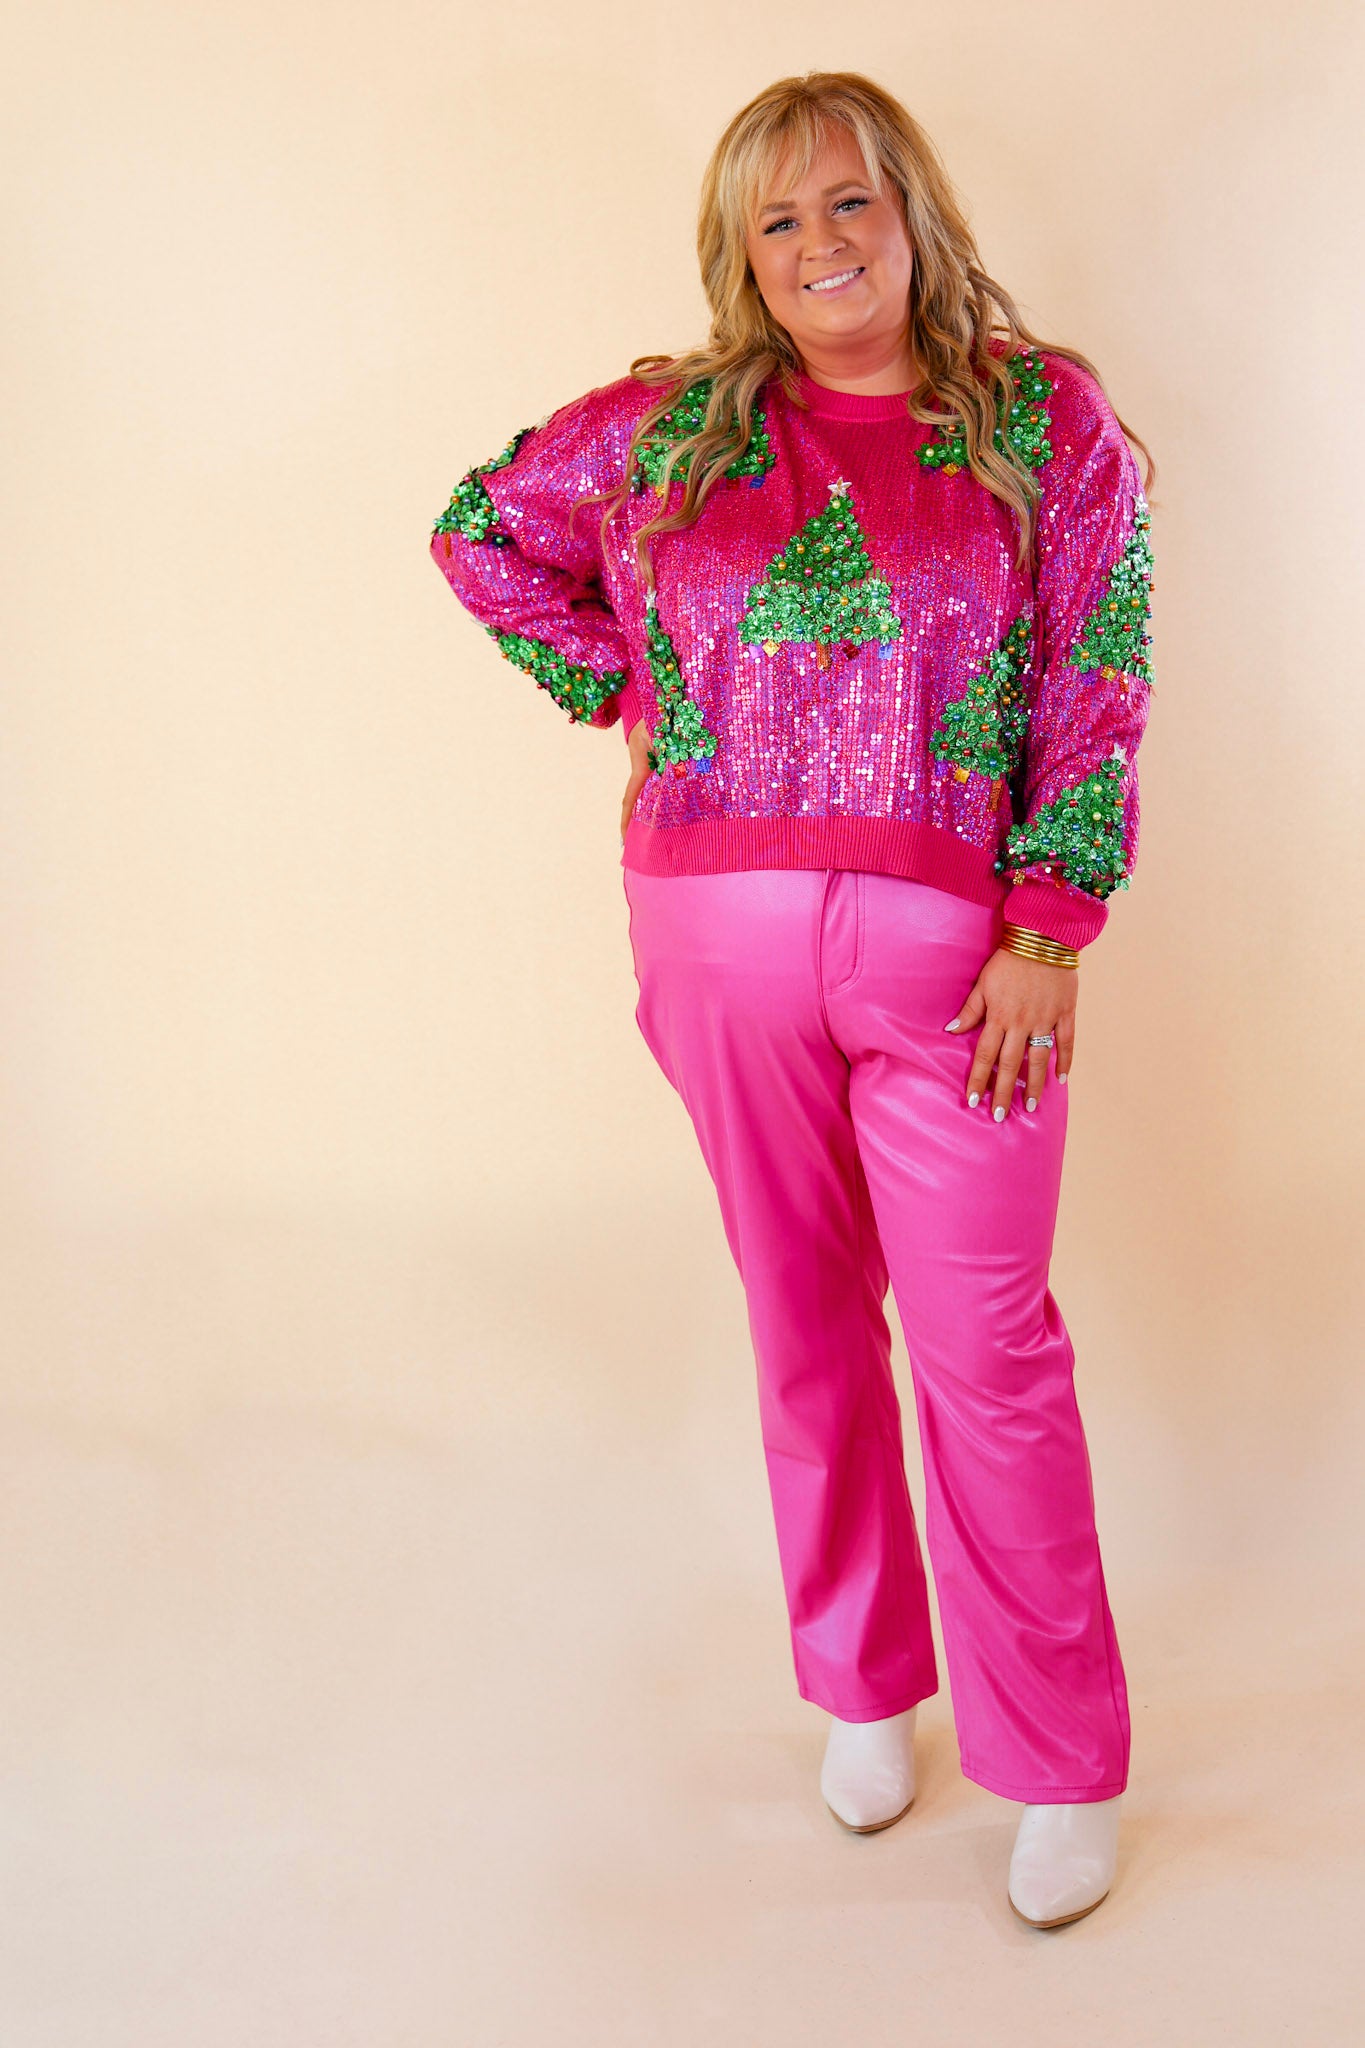 Queen Of Sparkles | Full Sequin Graphic Christmas Tree Sweater in Pink - Giddy Up Glamour Boutique